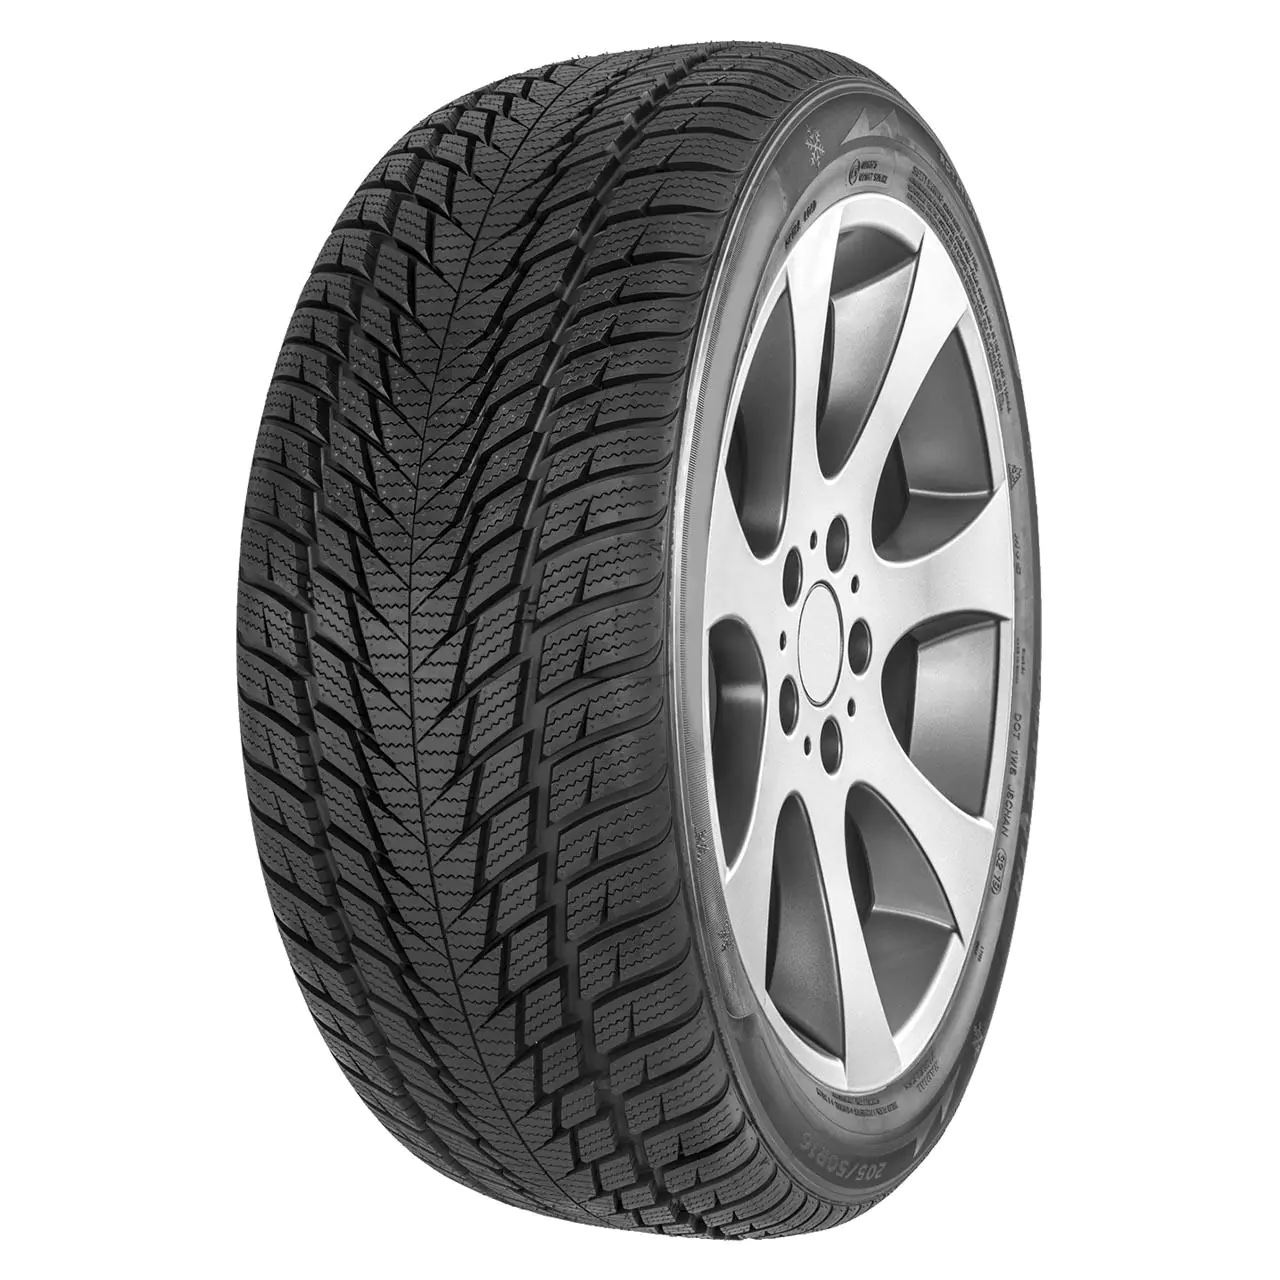 Gomme Autovettura Fortuna 215/45 R16 90V GOWIN UHP2 XL M+S Invernale